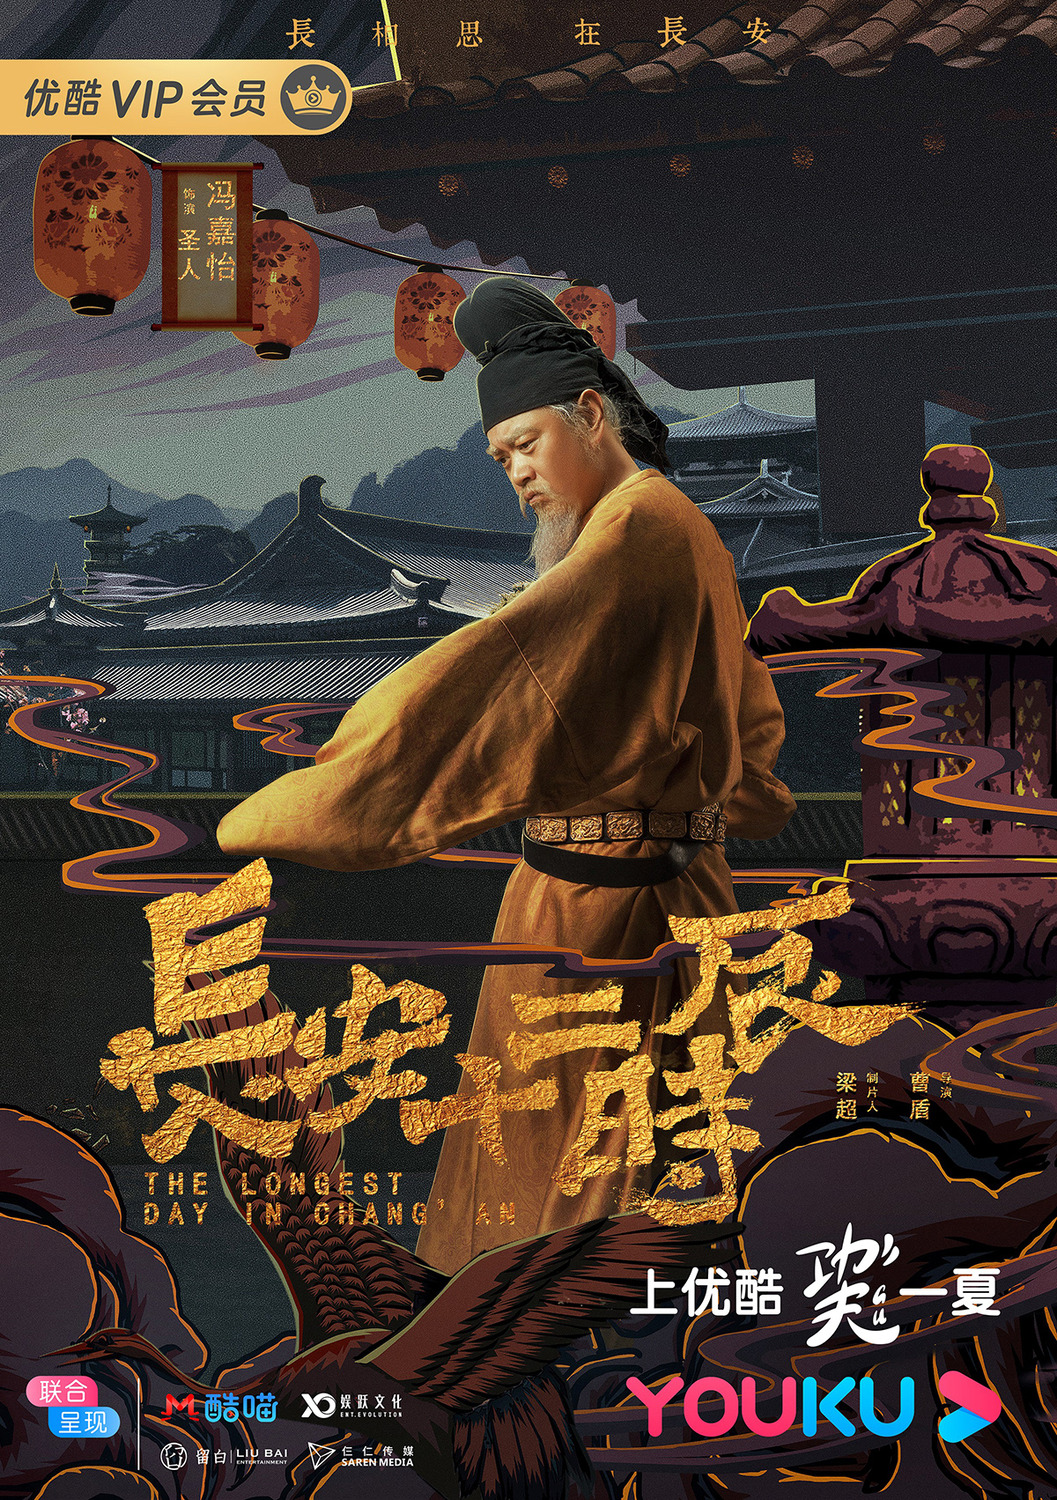 Extra Large TV Poster Image for Chang'an shi er shi chen (#17 of 18)